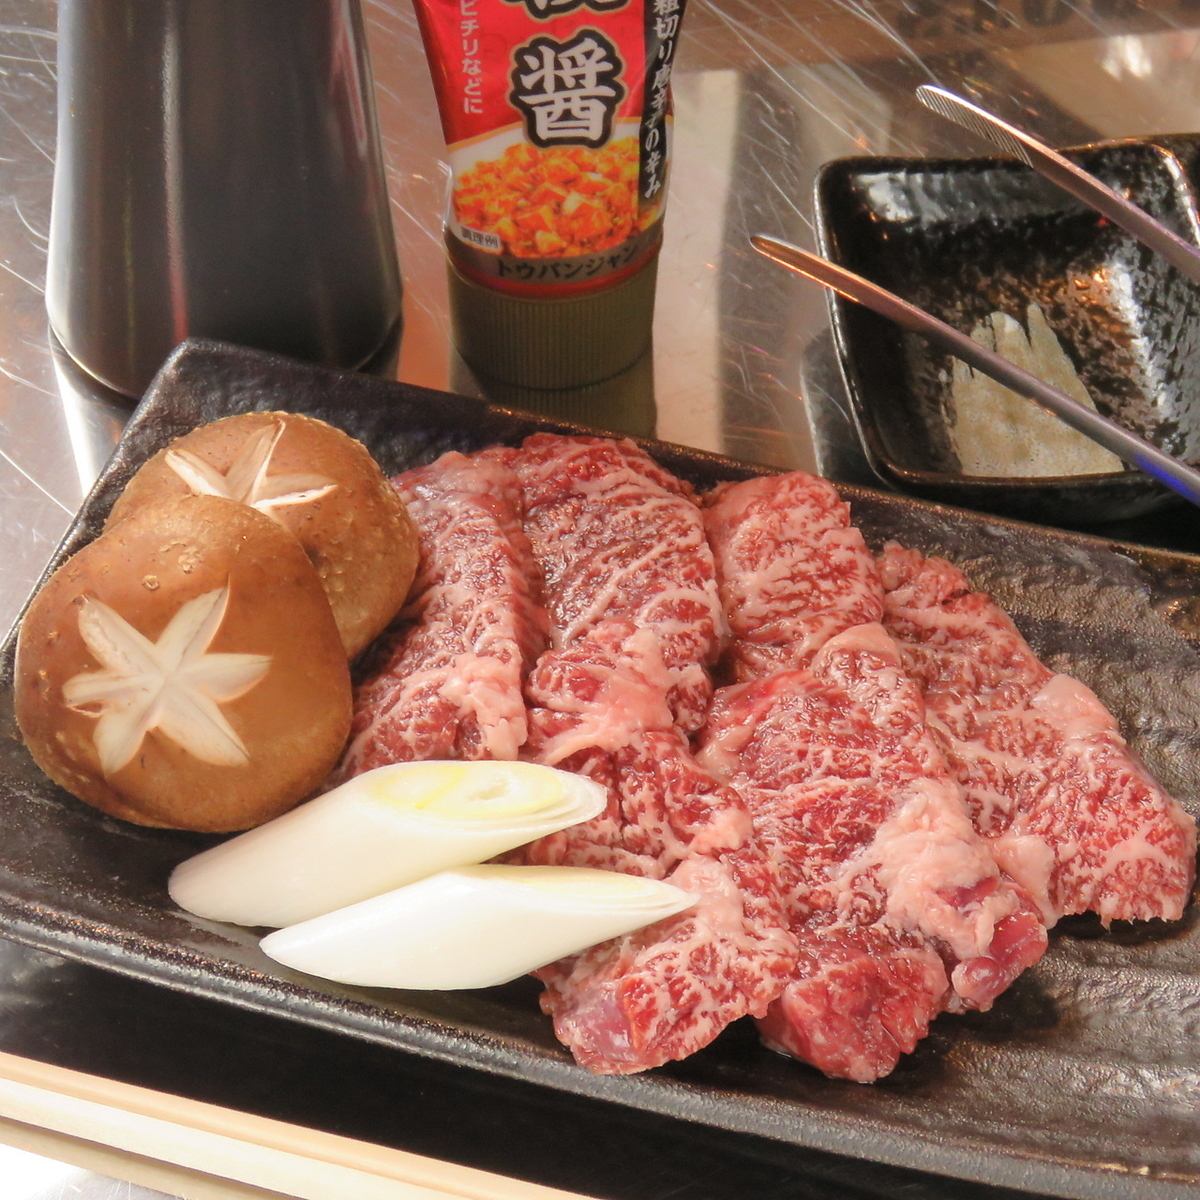 It's perfect for everyday use such as friends and family ♪ Enjoy the special Korean food!